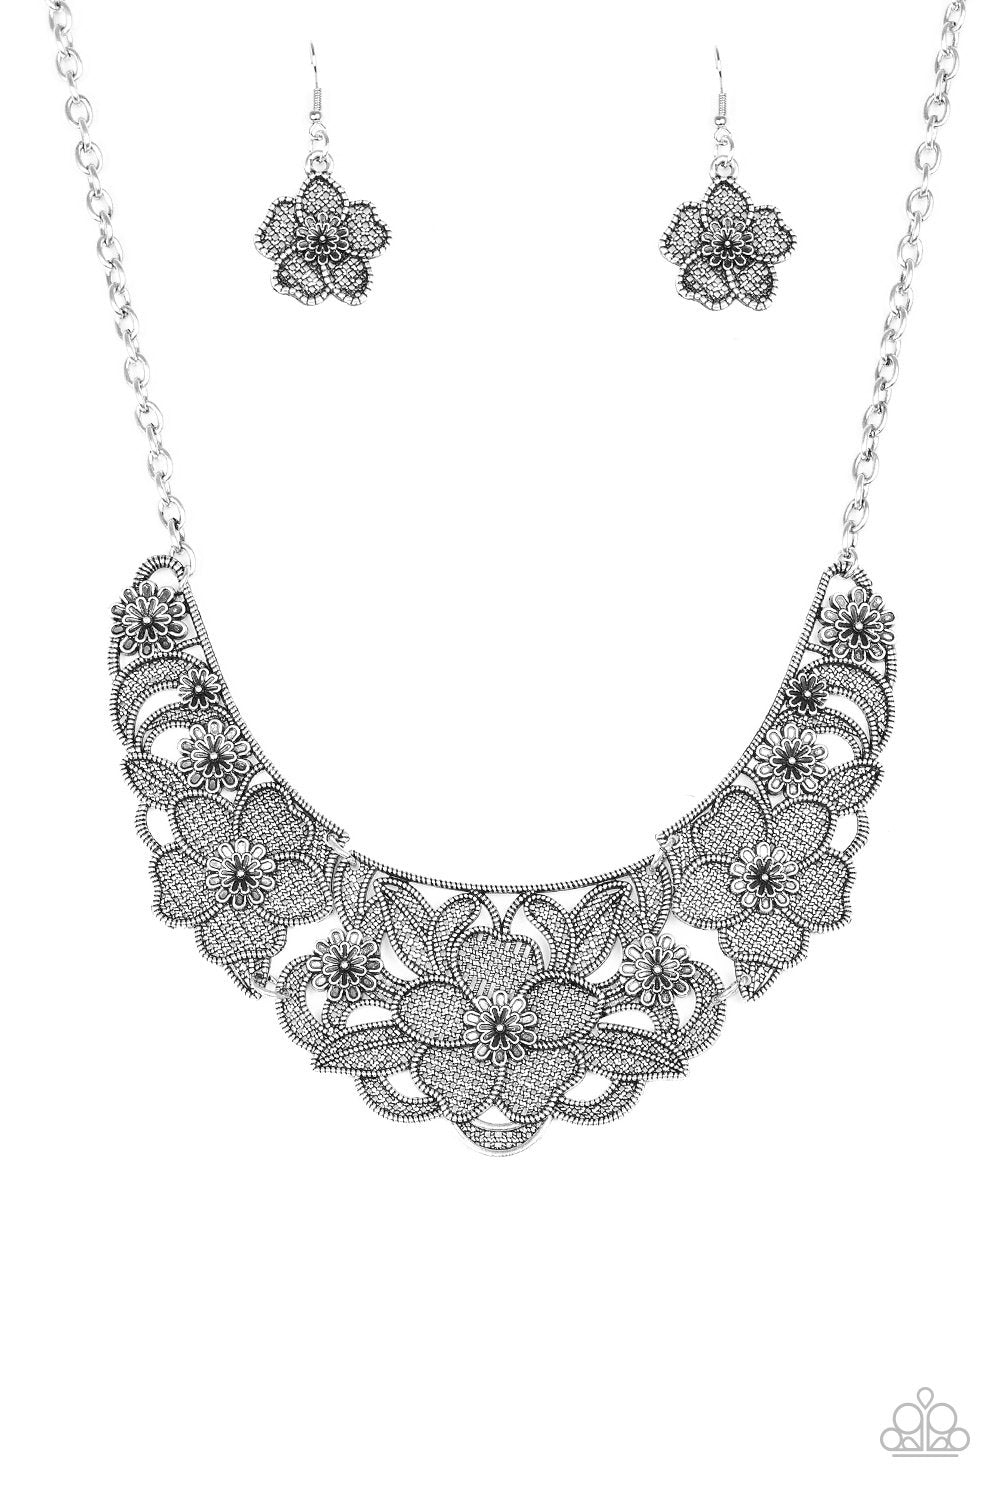 Petunia Paradise Silver Statement Necklace - Paparazzi Accessories-CarasShop.com - $5 Jewelry by Cara Jewels